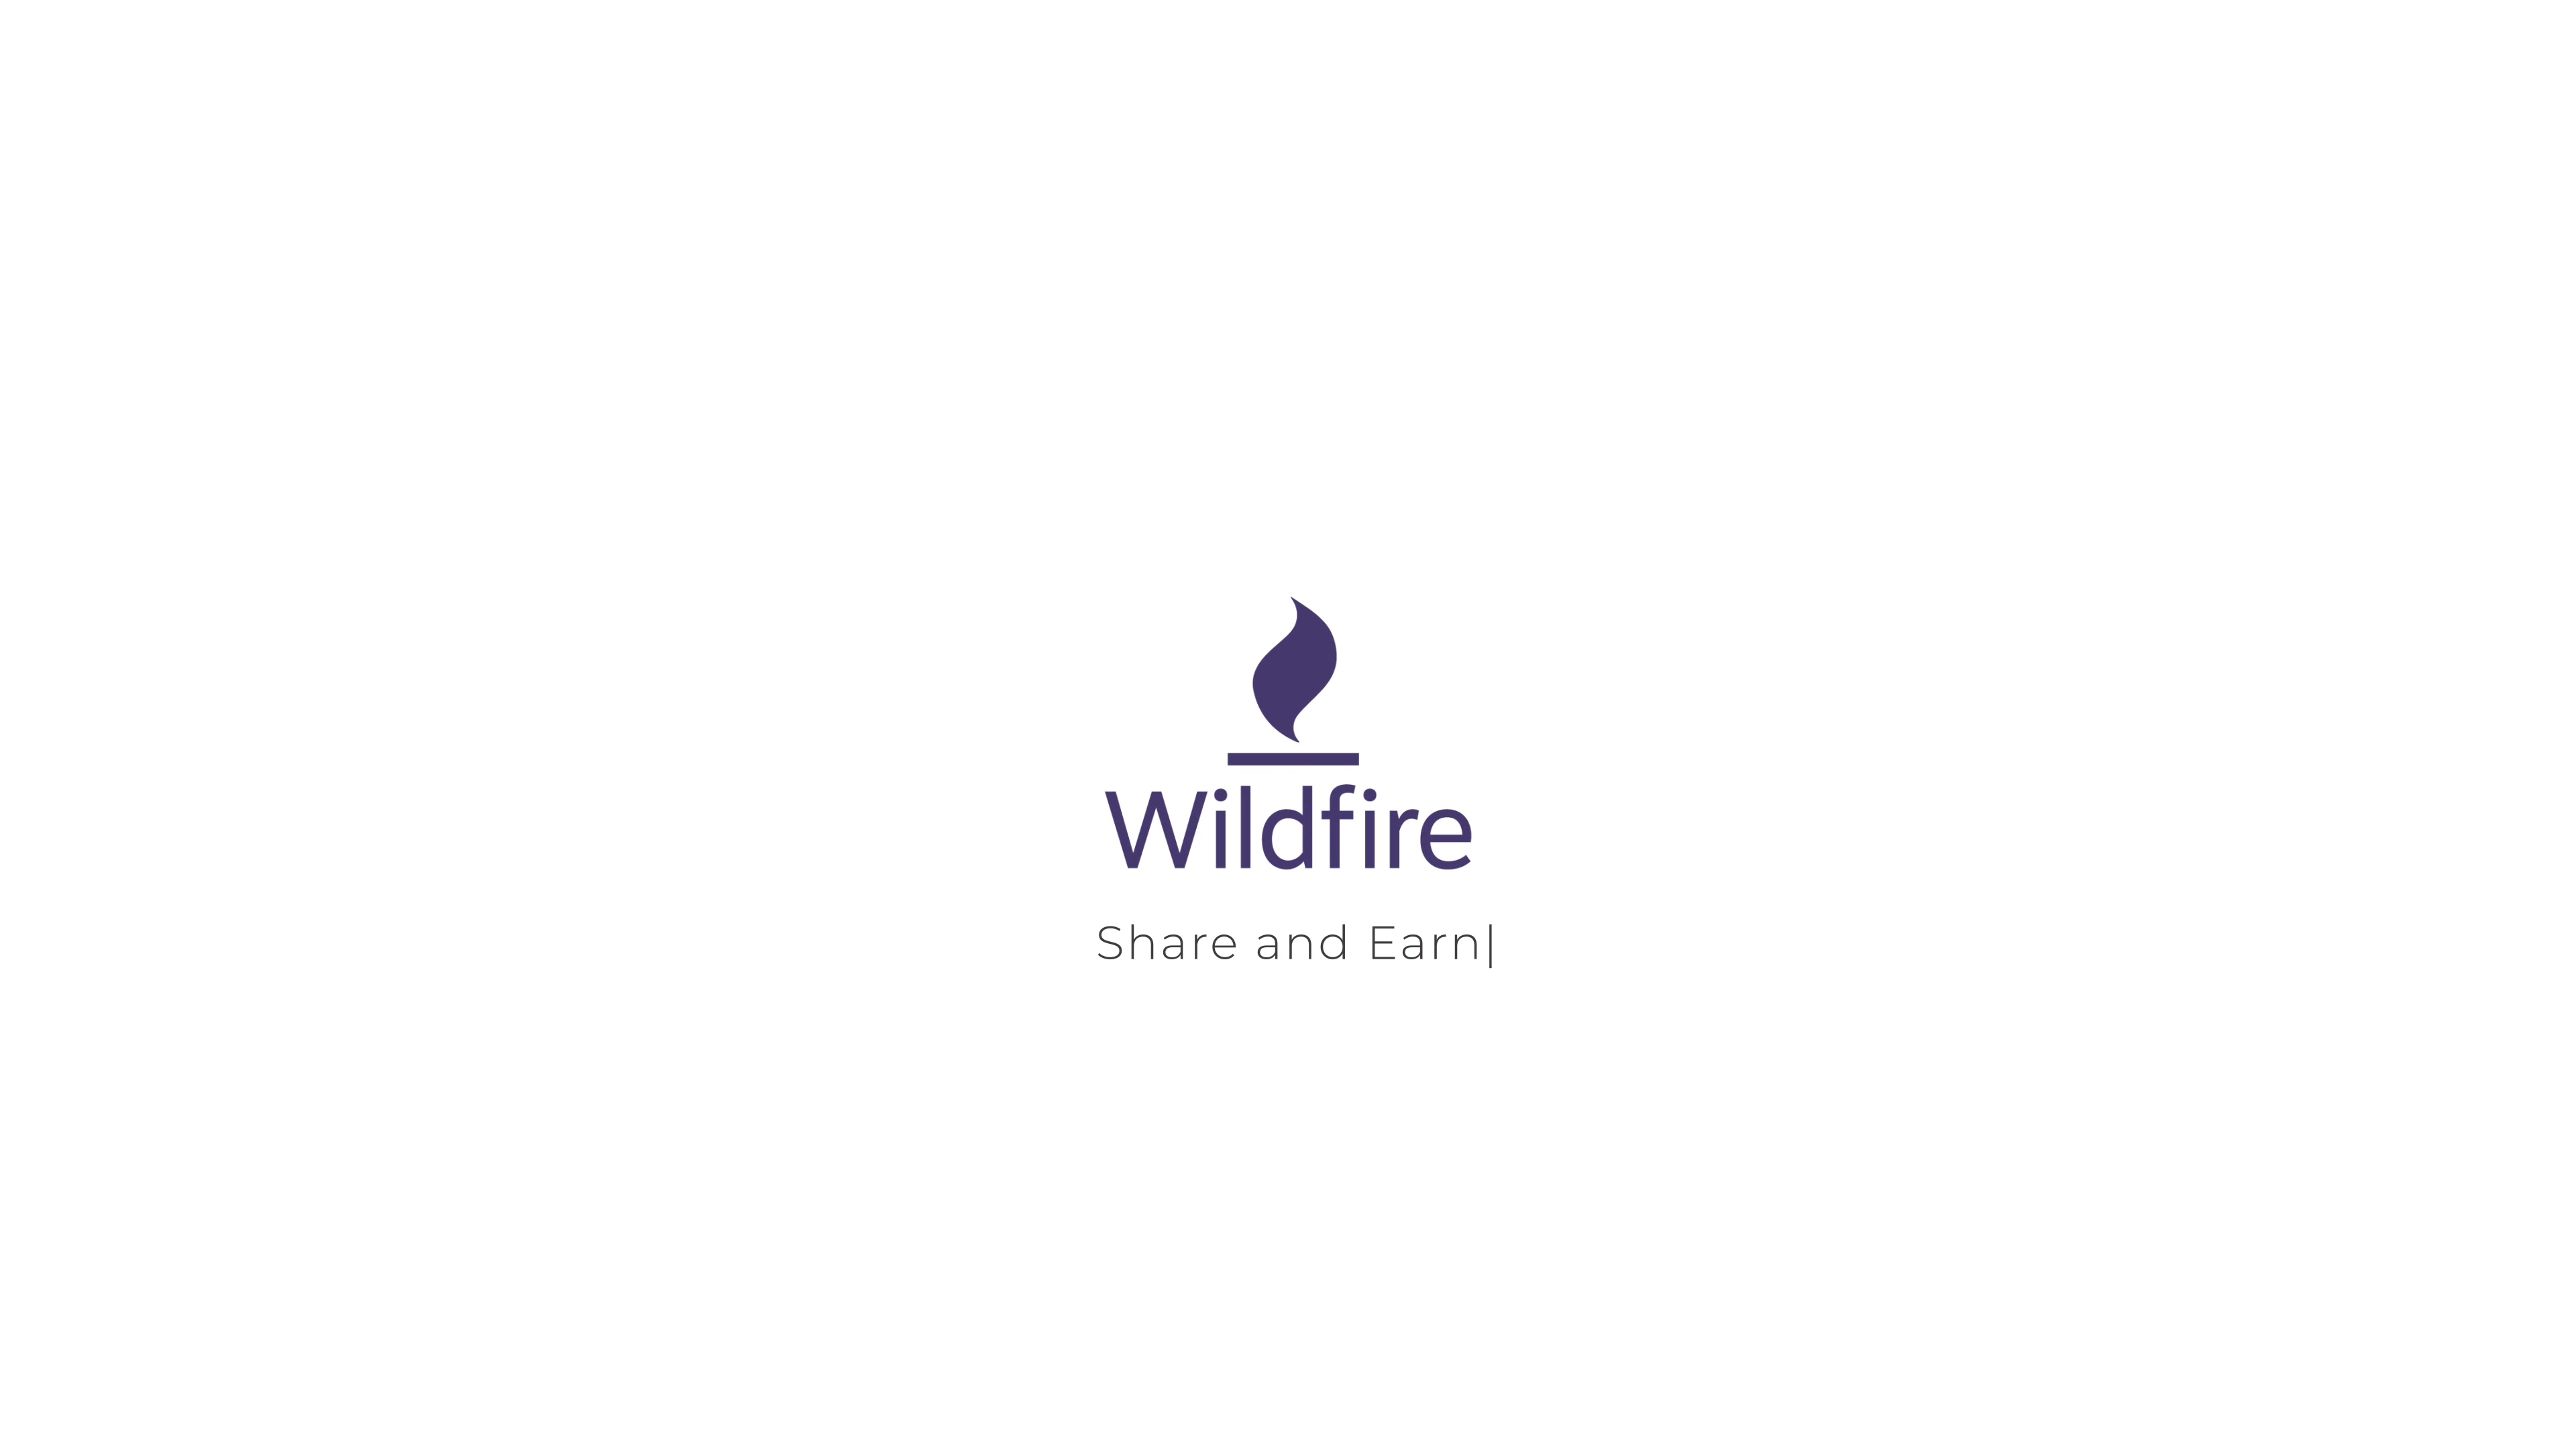 Wildfire | Share and Earn